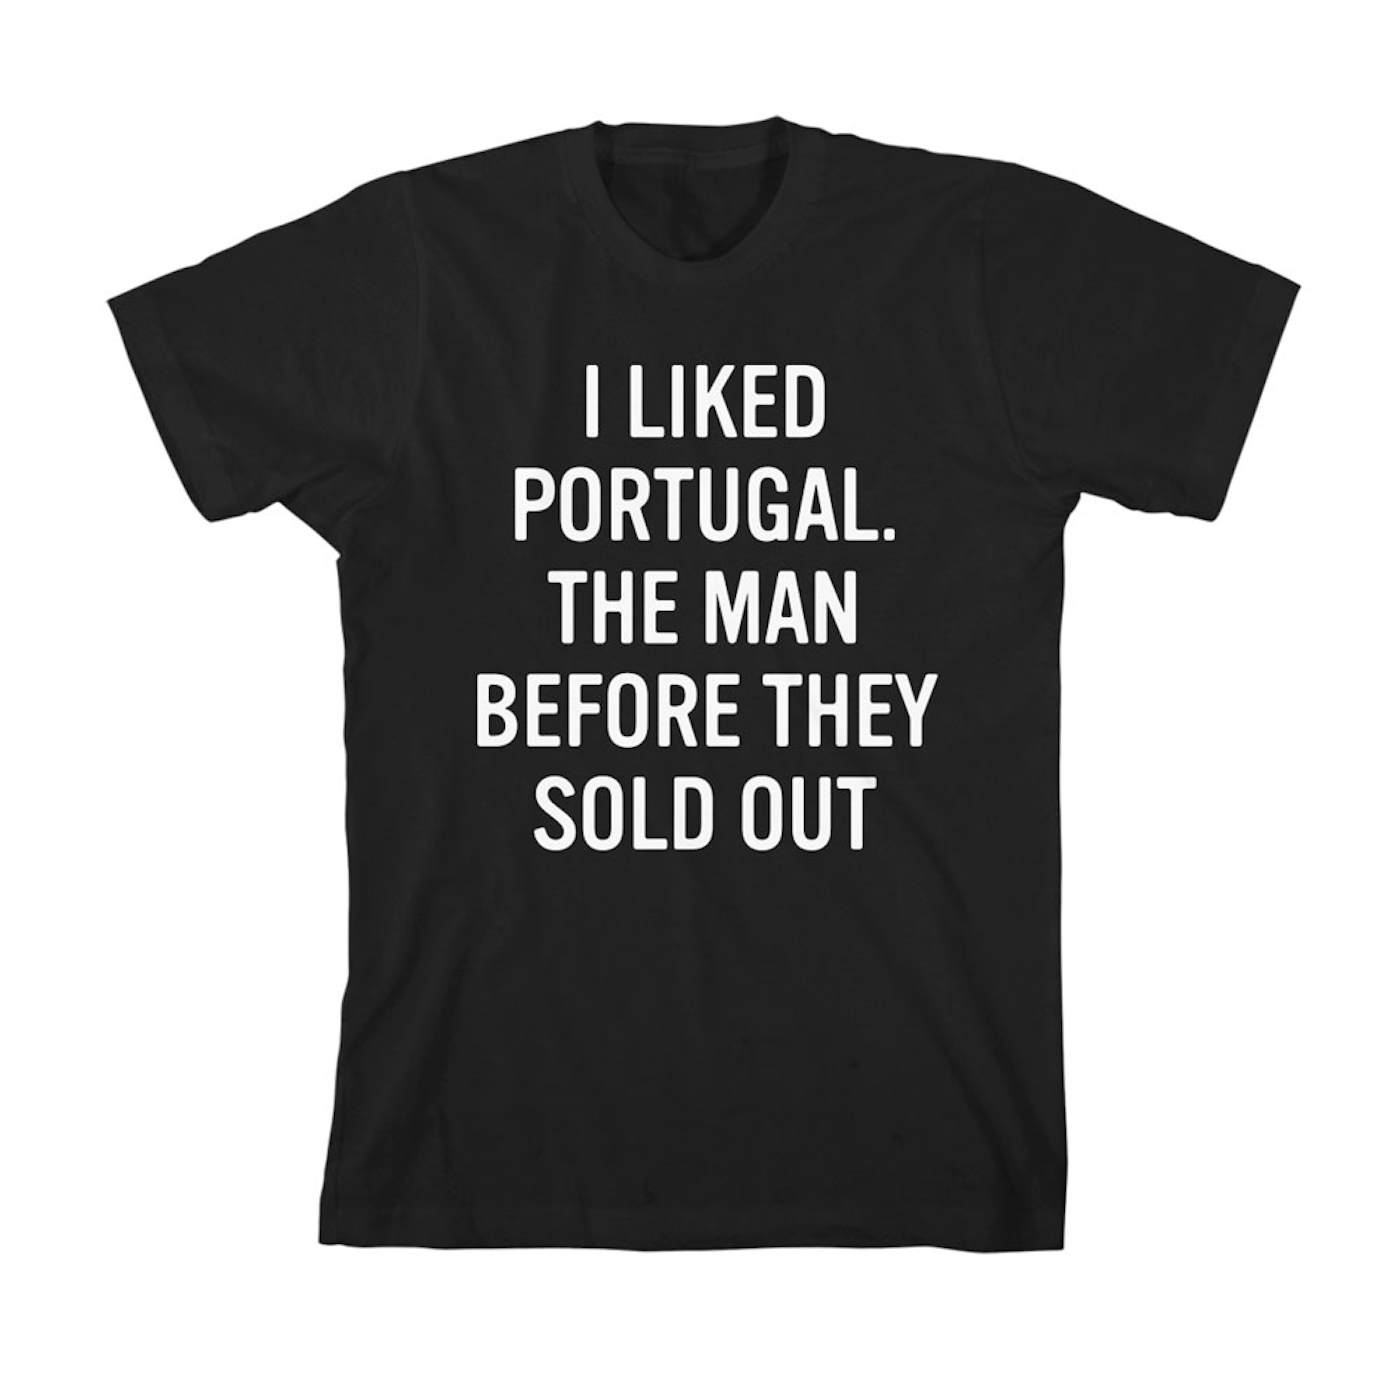 Portugal. The Man Before They Sold Out T-Shirt